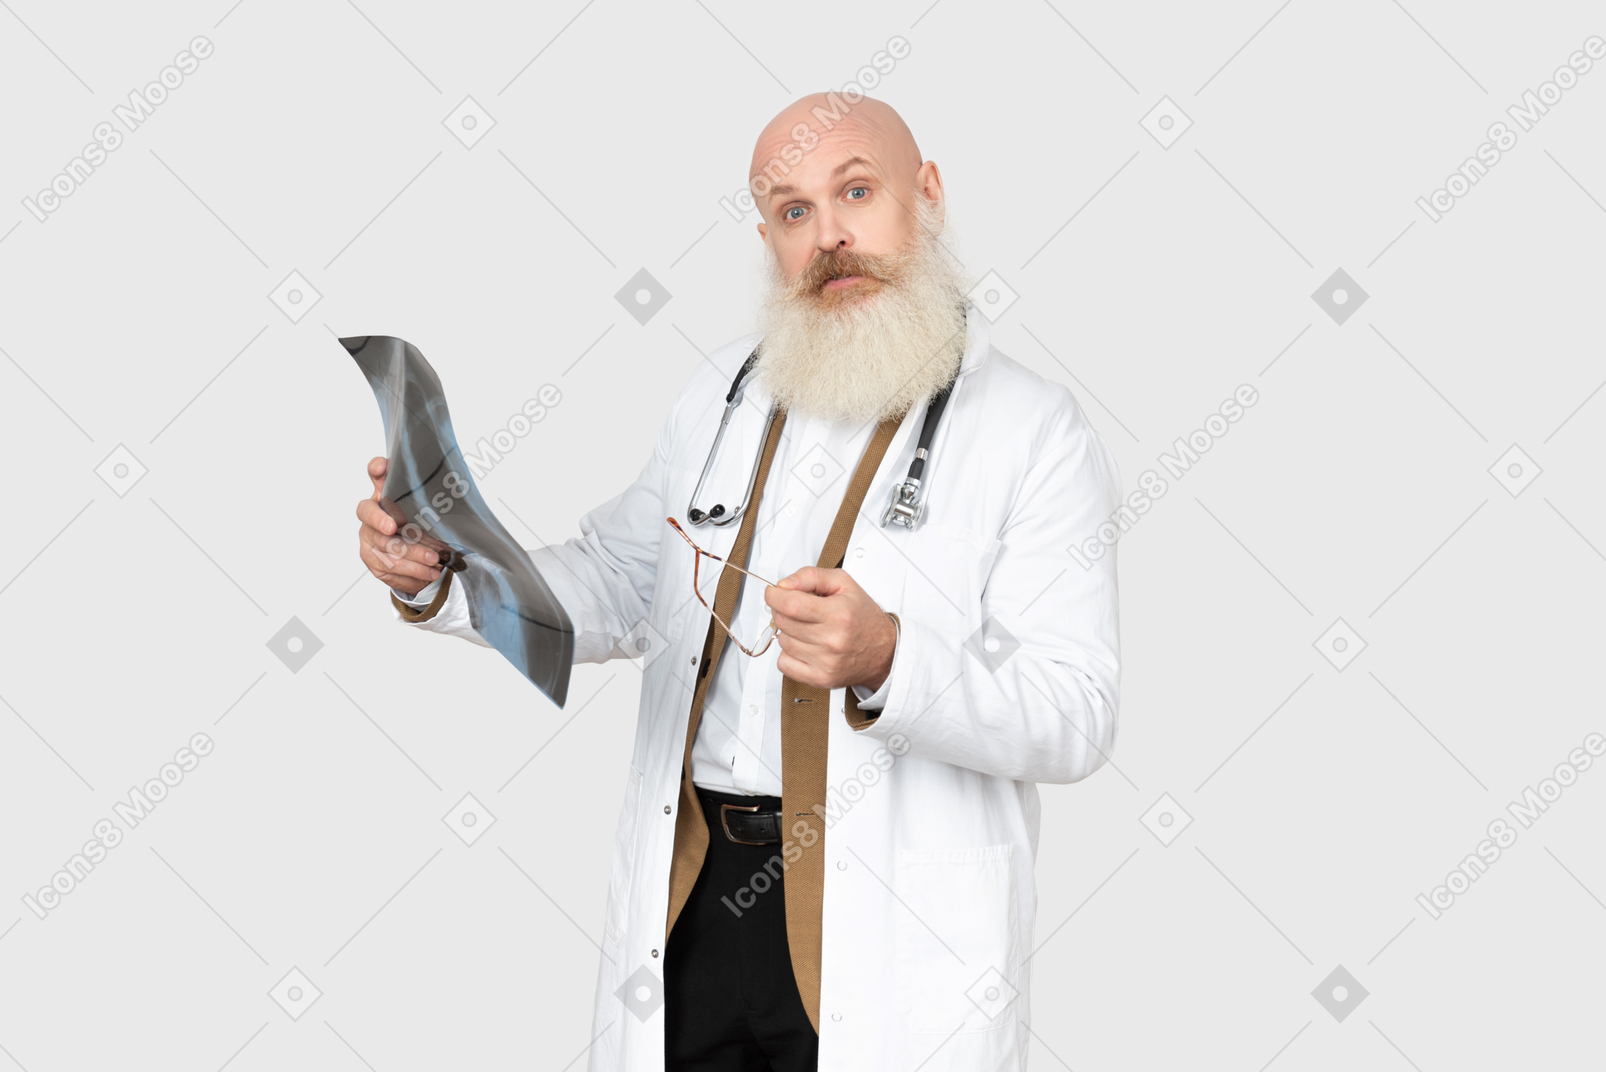 Mature doctor holding an x-ray